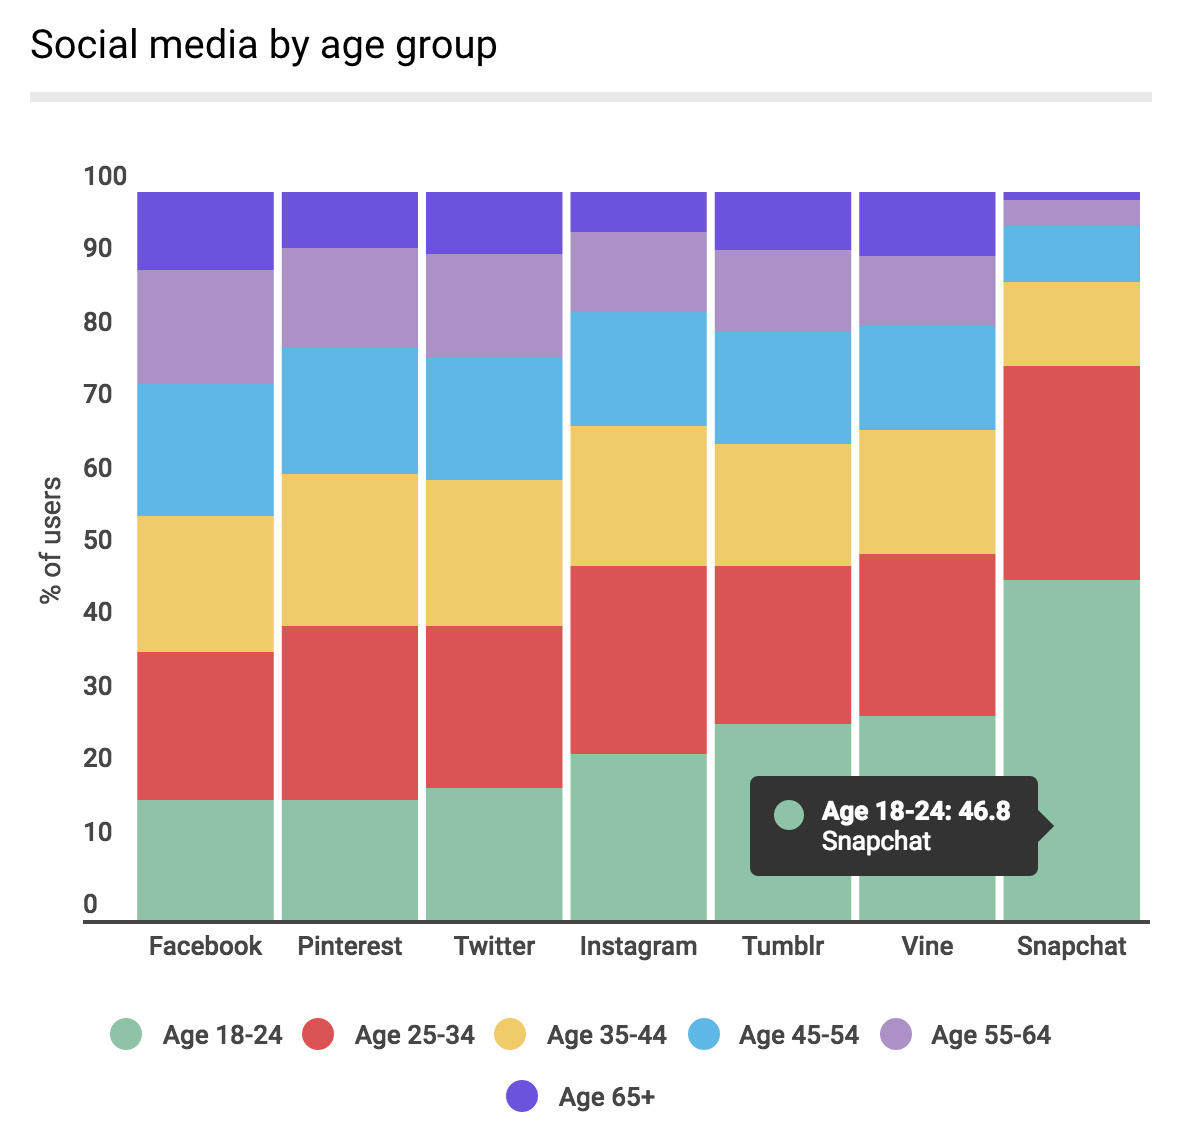 Snapchat Marketing: This is just how much Snapchat dominates with millennial users and why you need a Snapchat social media strategy